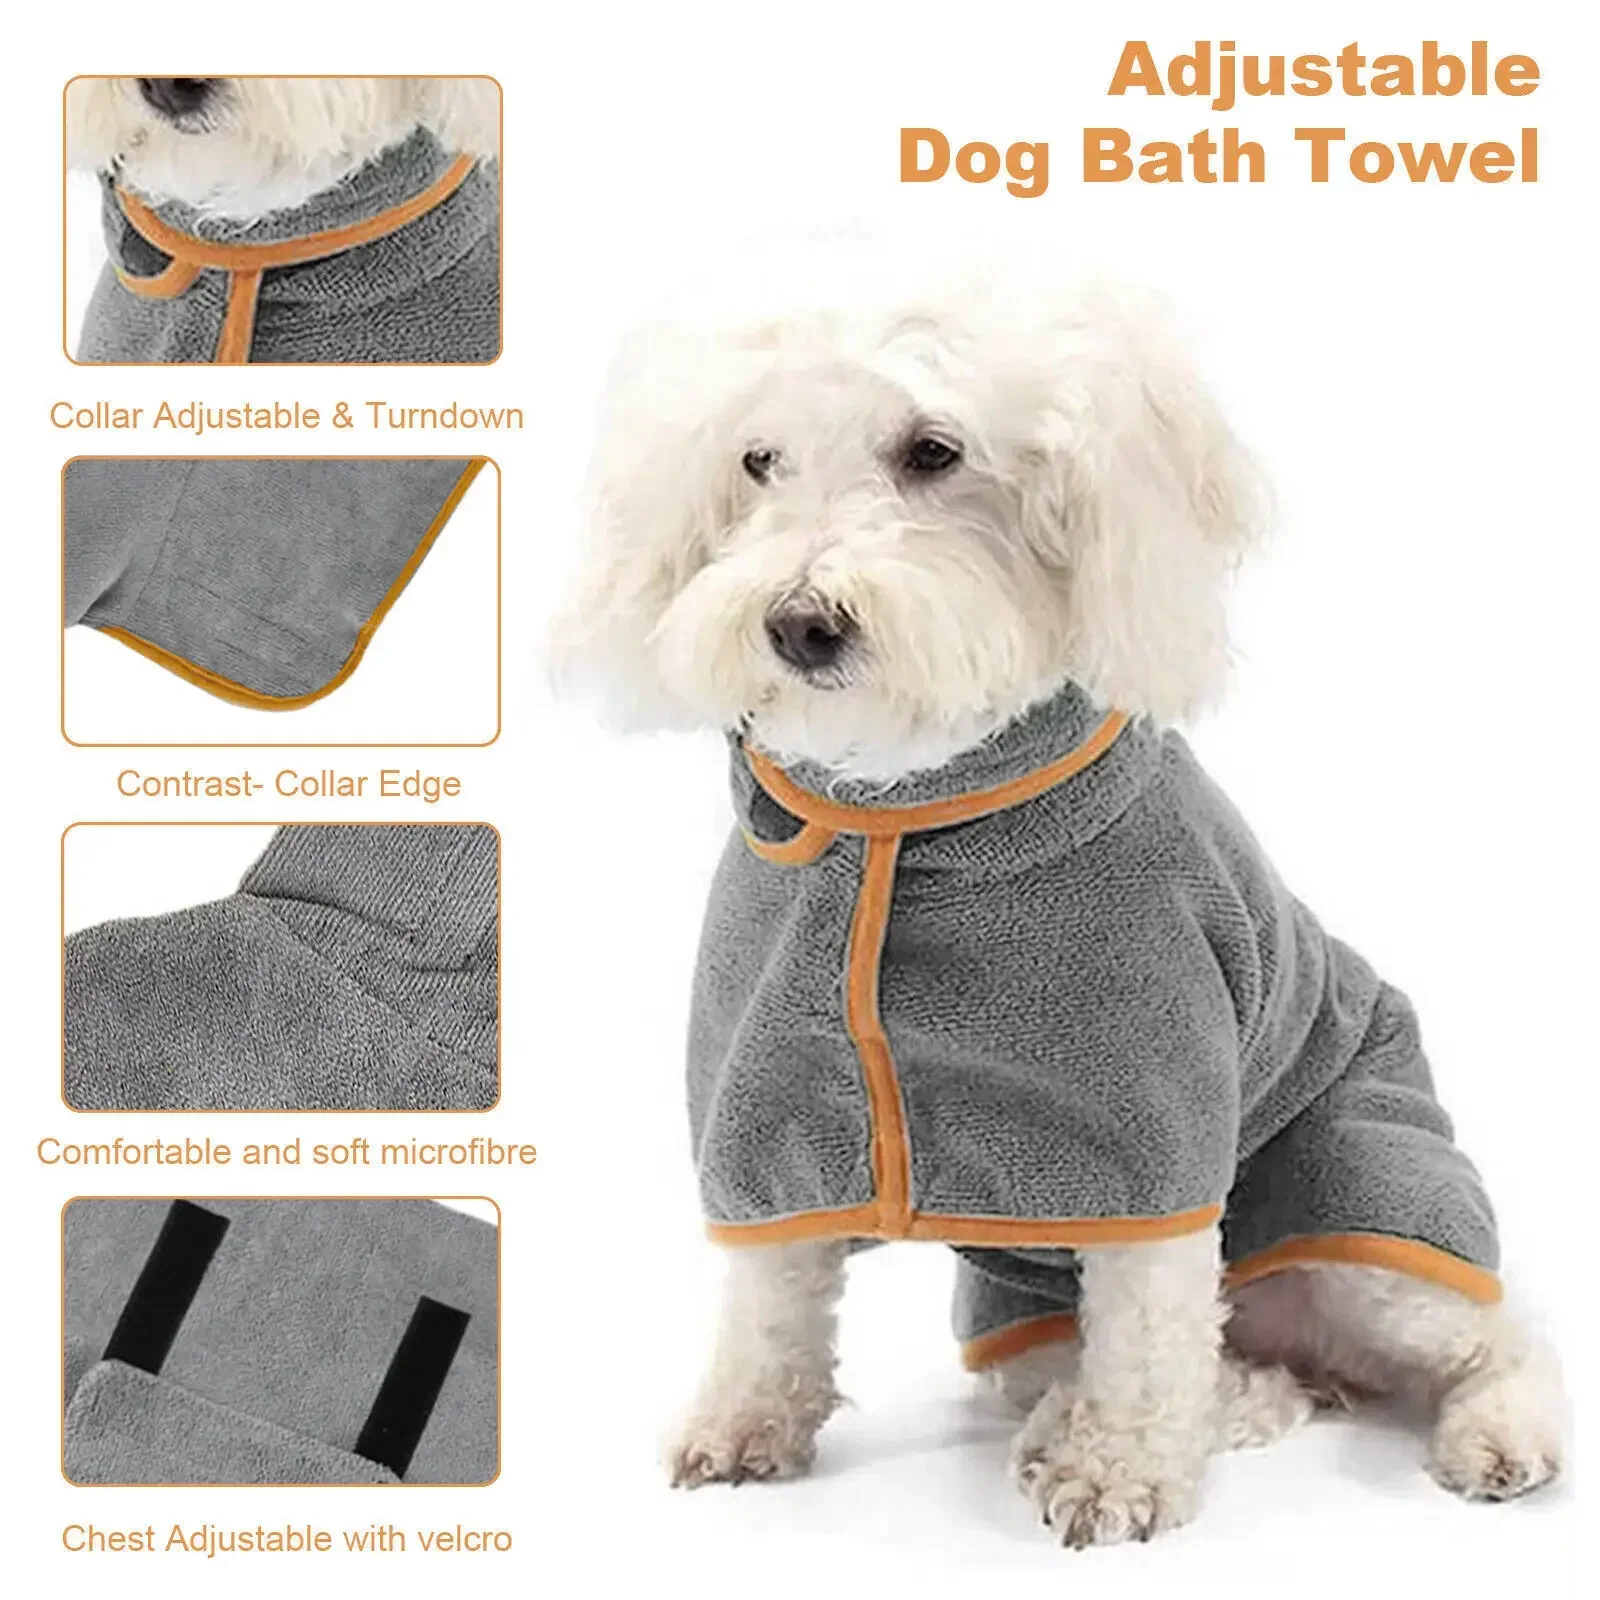 

Bathrobe Pet Dog Drying Coat Clothes Microfiber Absorbent Beach Towel for Large Medium Small Dogs Cats Fast Dry Dog Accessories